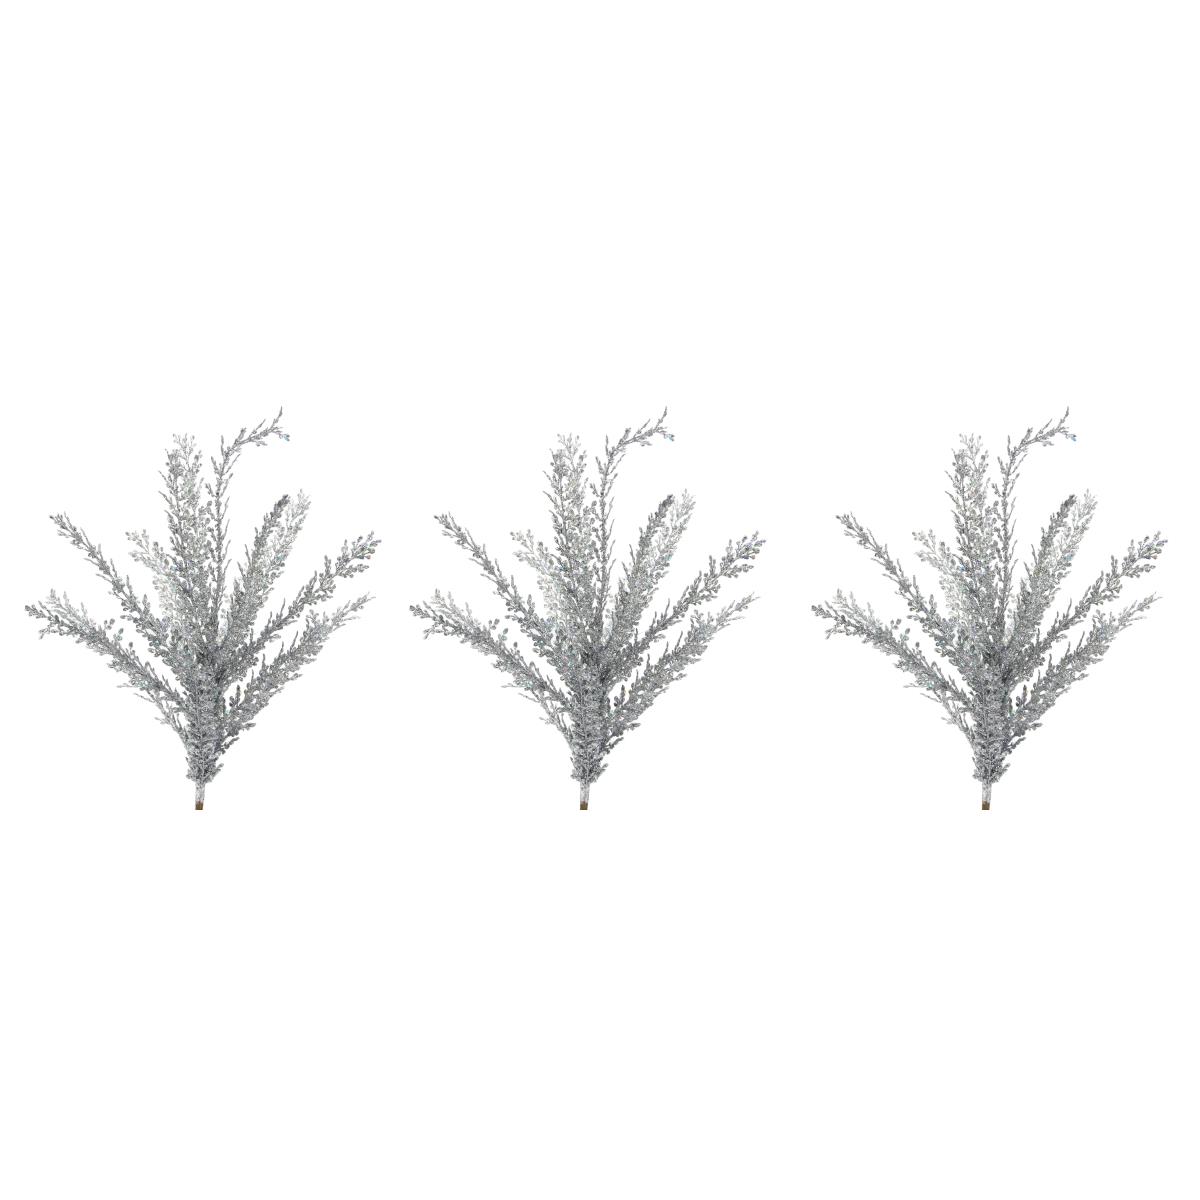 Admired By Nature Gxl7706-silver-3 23 In. Glitter Filigree Leaf Spray Christmas Decor, Silver - Set Of 3